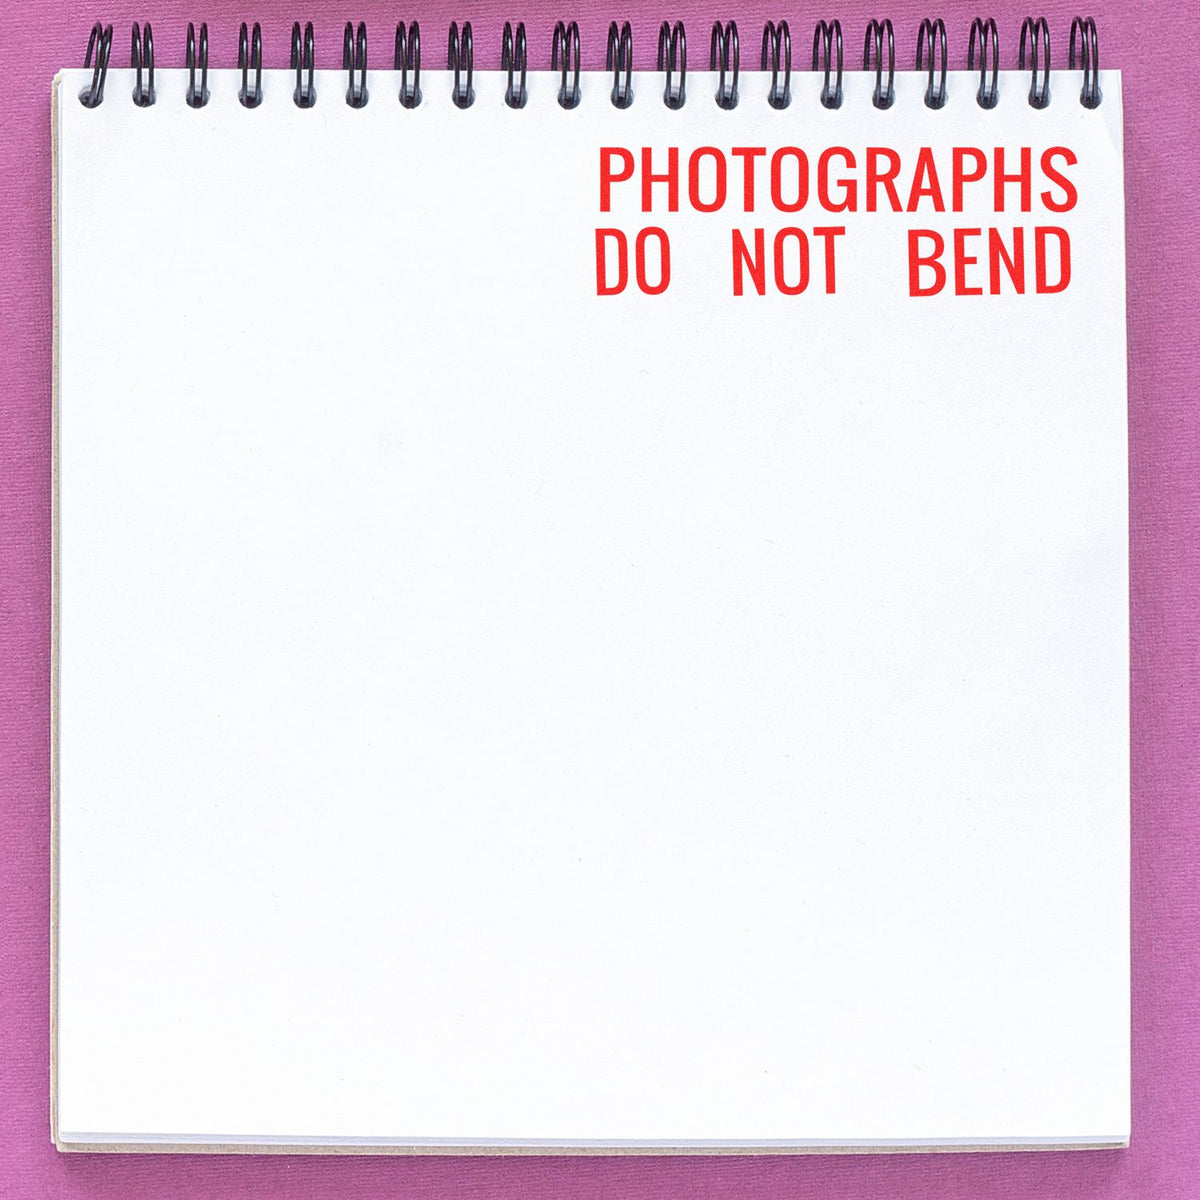 Large Photographs Do Not Bend Rubber Stamp In Use Photo